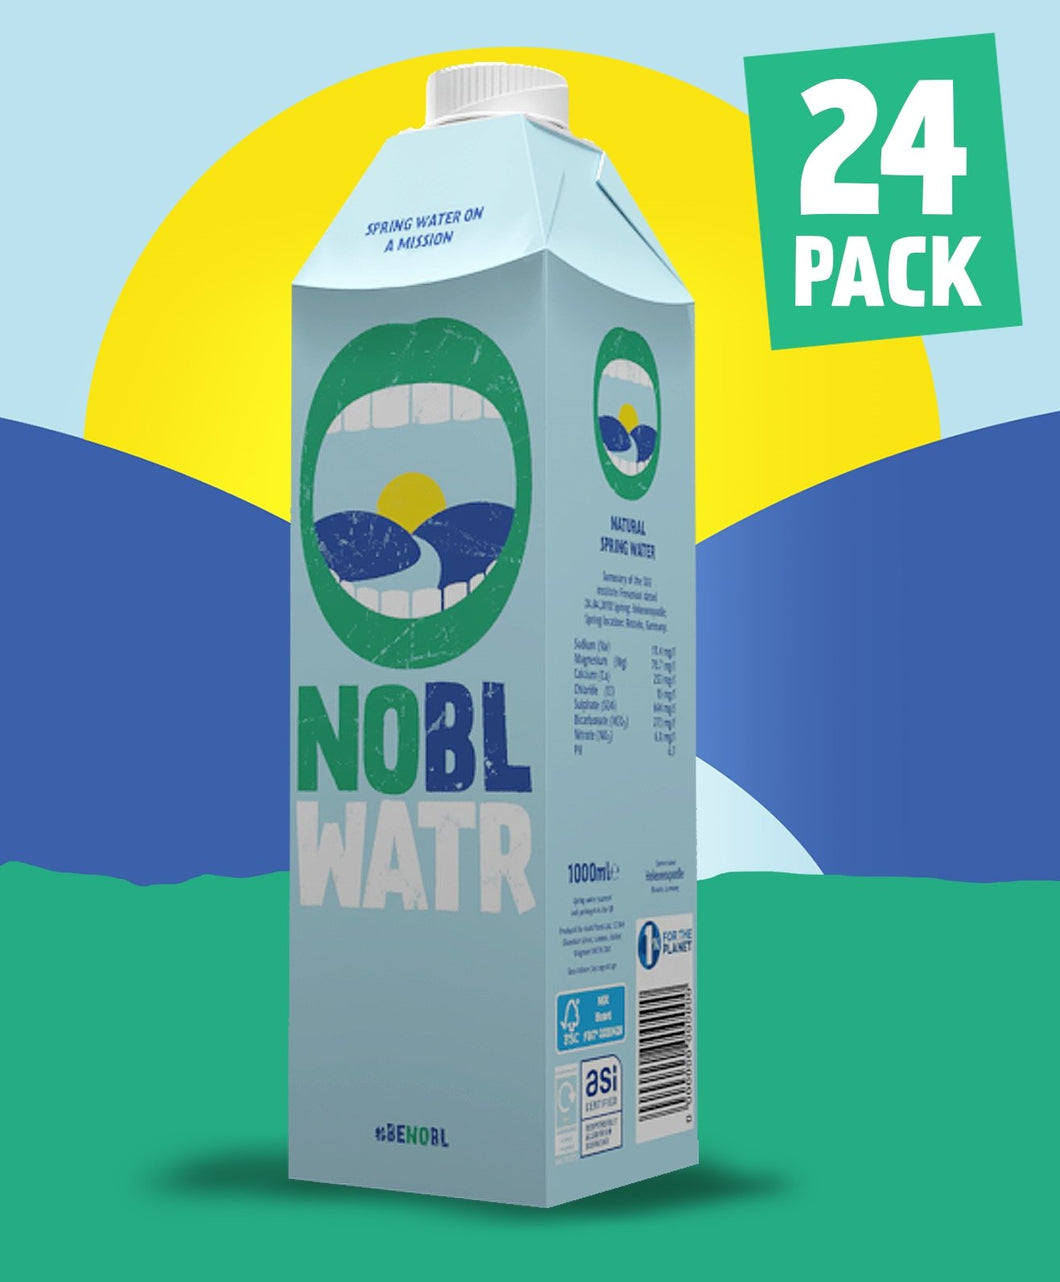 NOBL WATR 24 x 1L - NOBL WATR spring water on mission. 1L UK Sprink water in eco-friendly plant based cartons